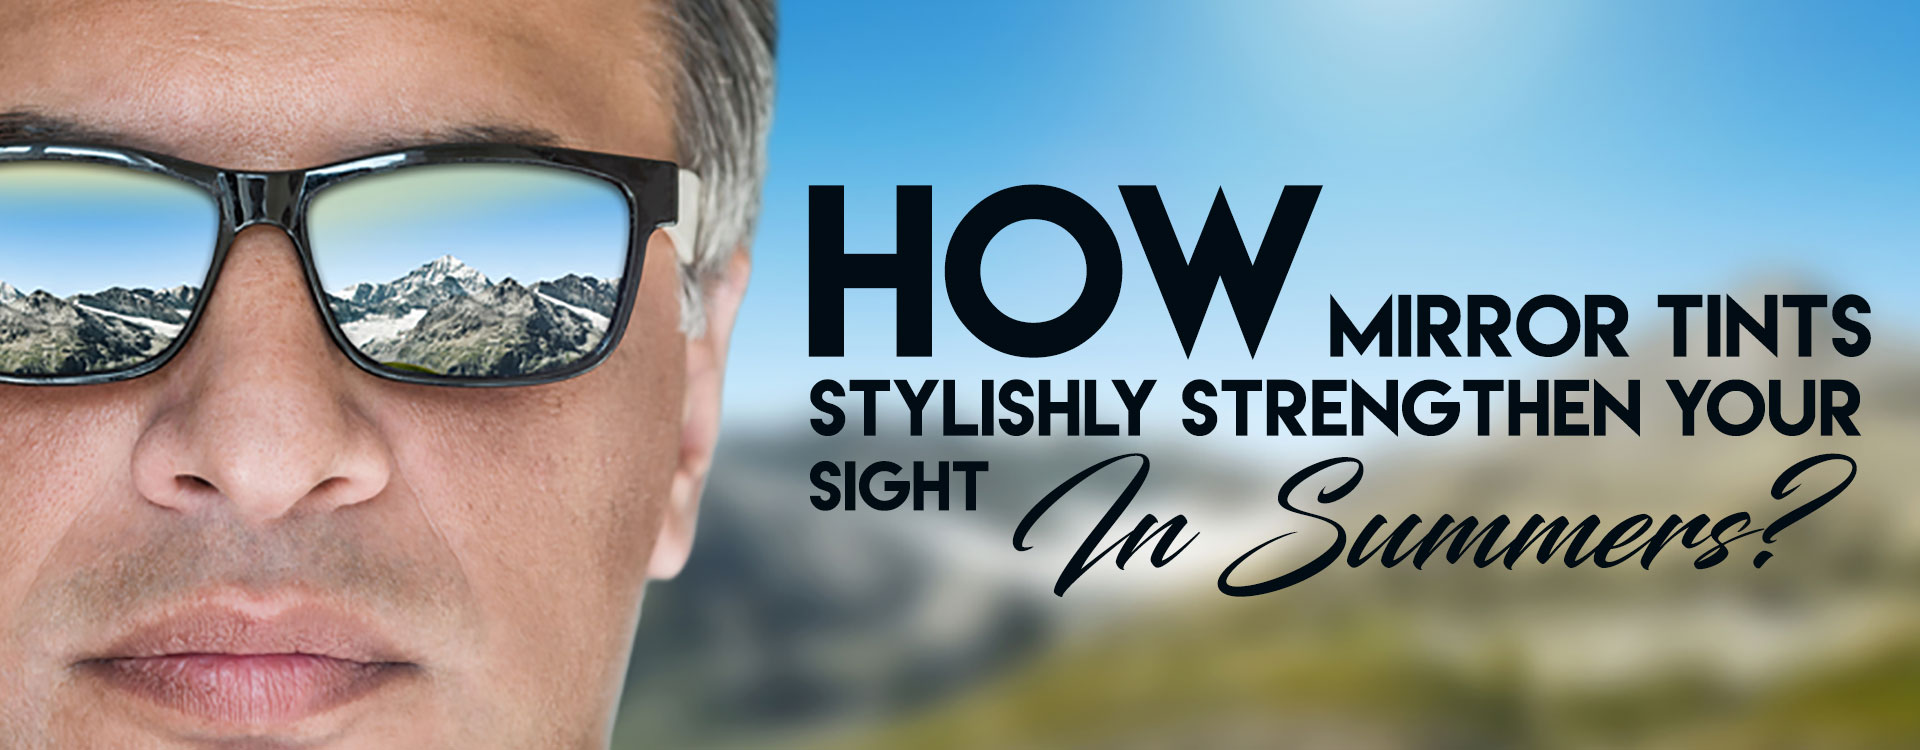 HOW MIRROR TINTS STYLISHLY STRENGTHEN YOUR SIGHT IN SUMMERS?